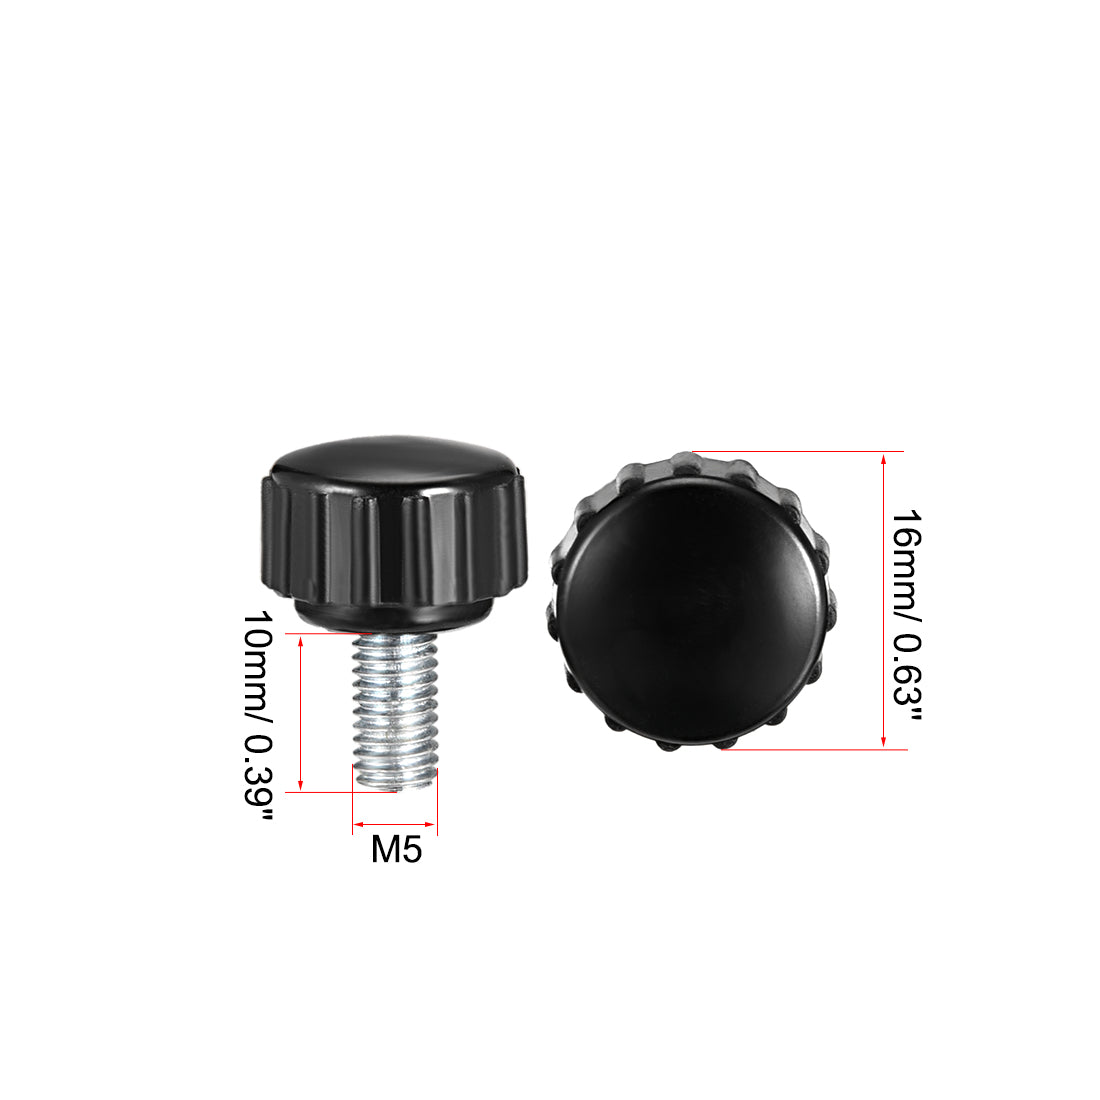 Uxcell Uxcell M5 x 30mm Male Thread Knurled Clamping Knobs Grip Thumb Screw on Type  2 Pcs